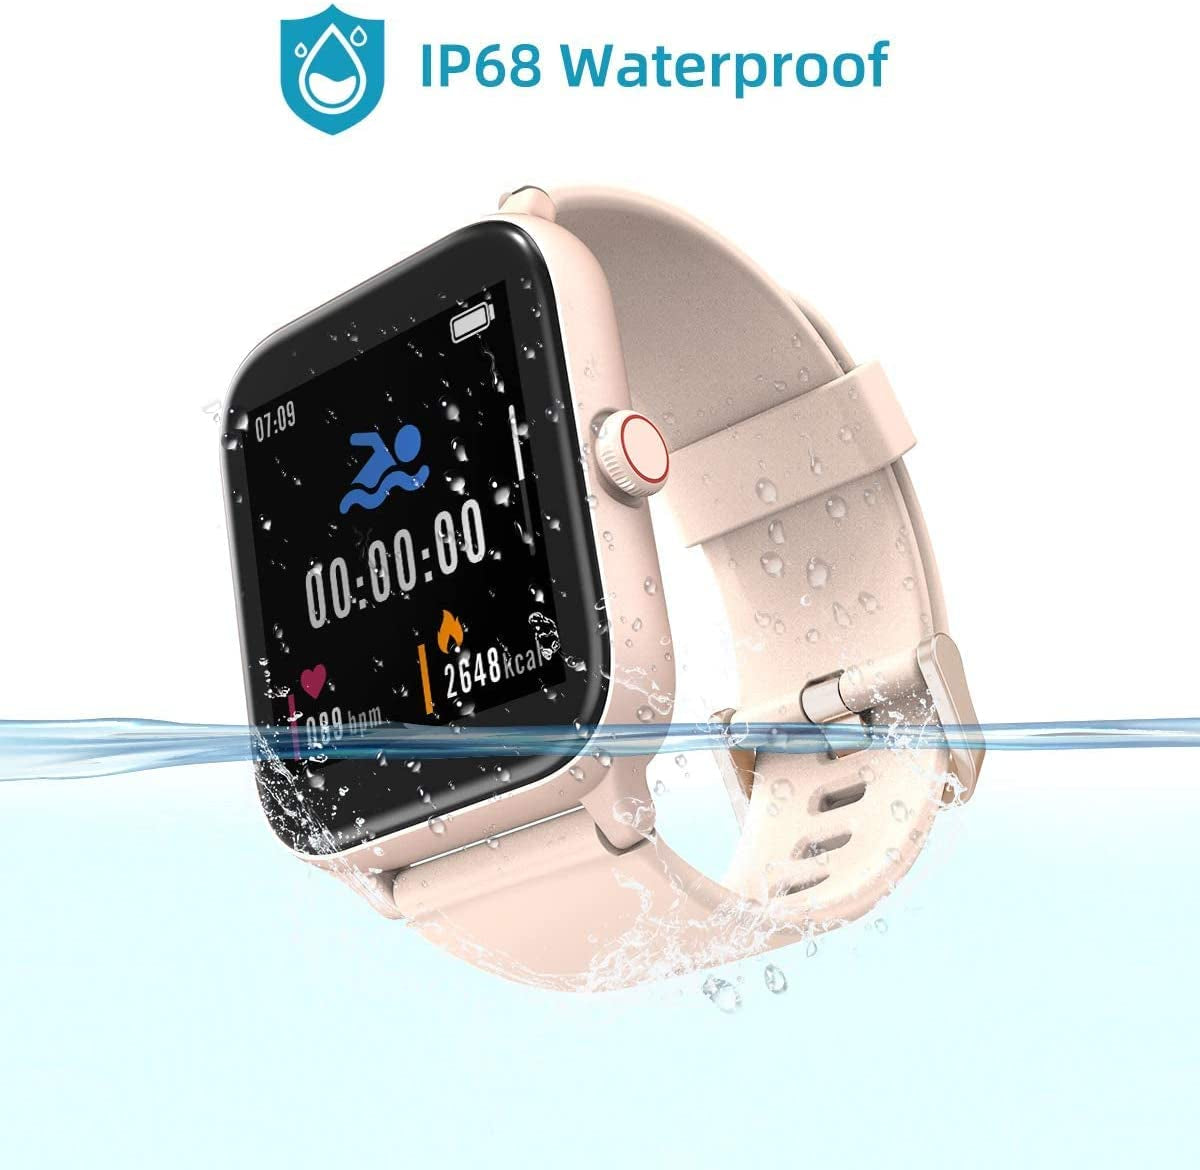 Smart Watch for Women, Fitness Tracker Heart Rate Monitor, IP68 Waterproof Pedometer Smartwatch for Android and Ios Phones, 1.54 Inch Digital Display Ultra-Long Battery Life